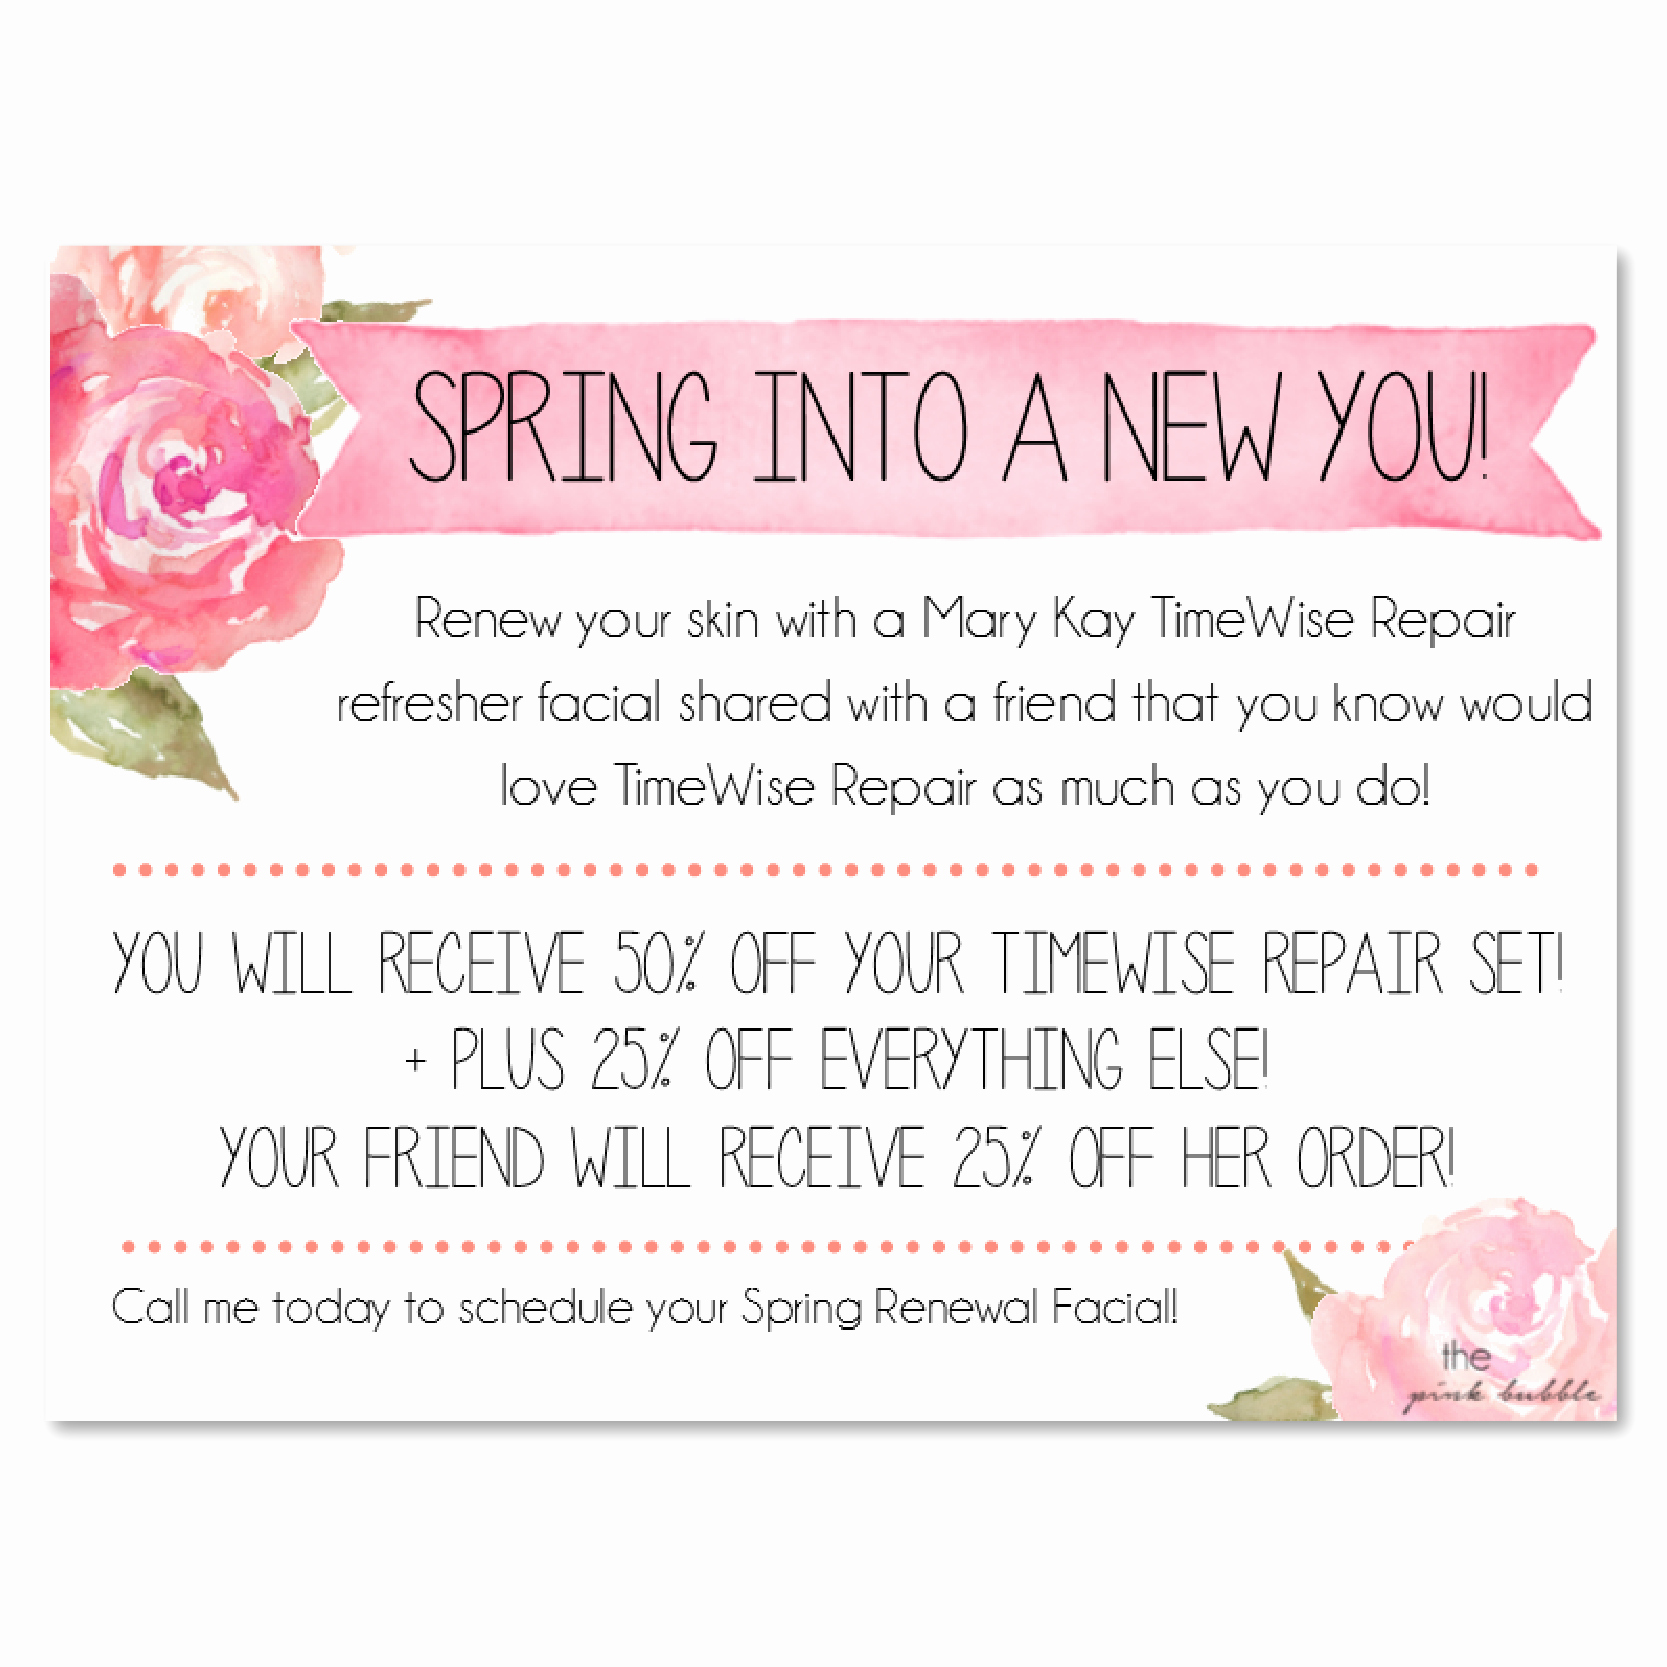 Mary Kay Party Invitation Ideas Awesome Mary Kay Timewise Repair Refresher Facial Invite Add Your